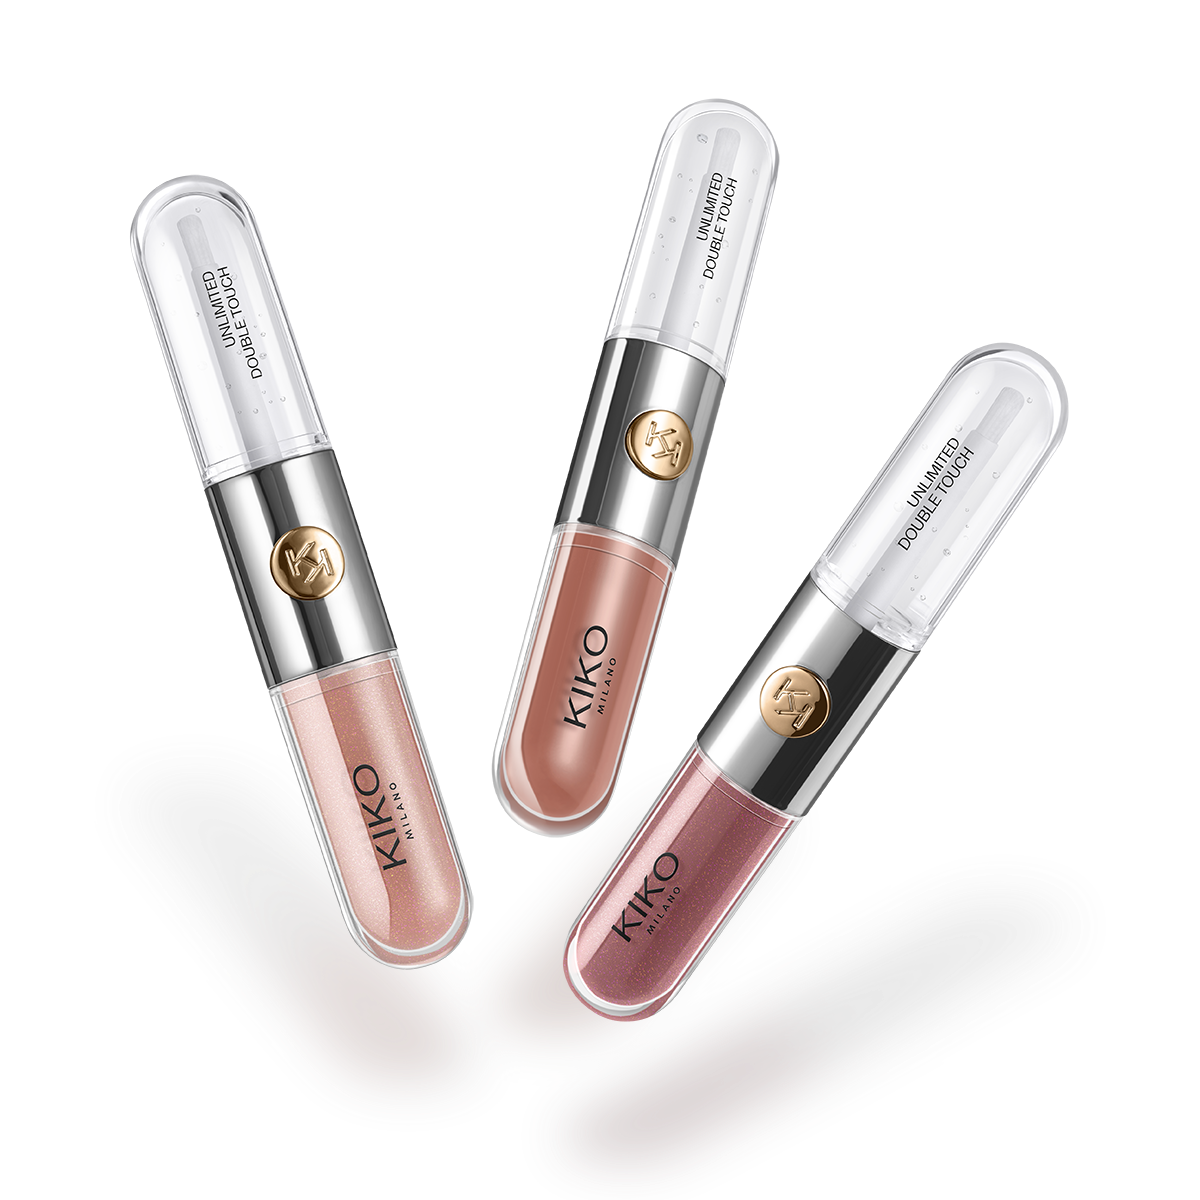 UNLIMITED DOUBLE TOUCH LIP SET - Nude Attitude